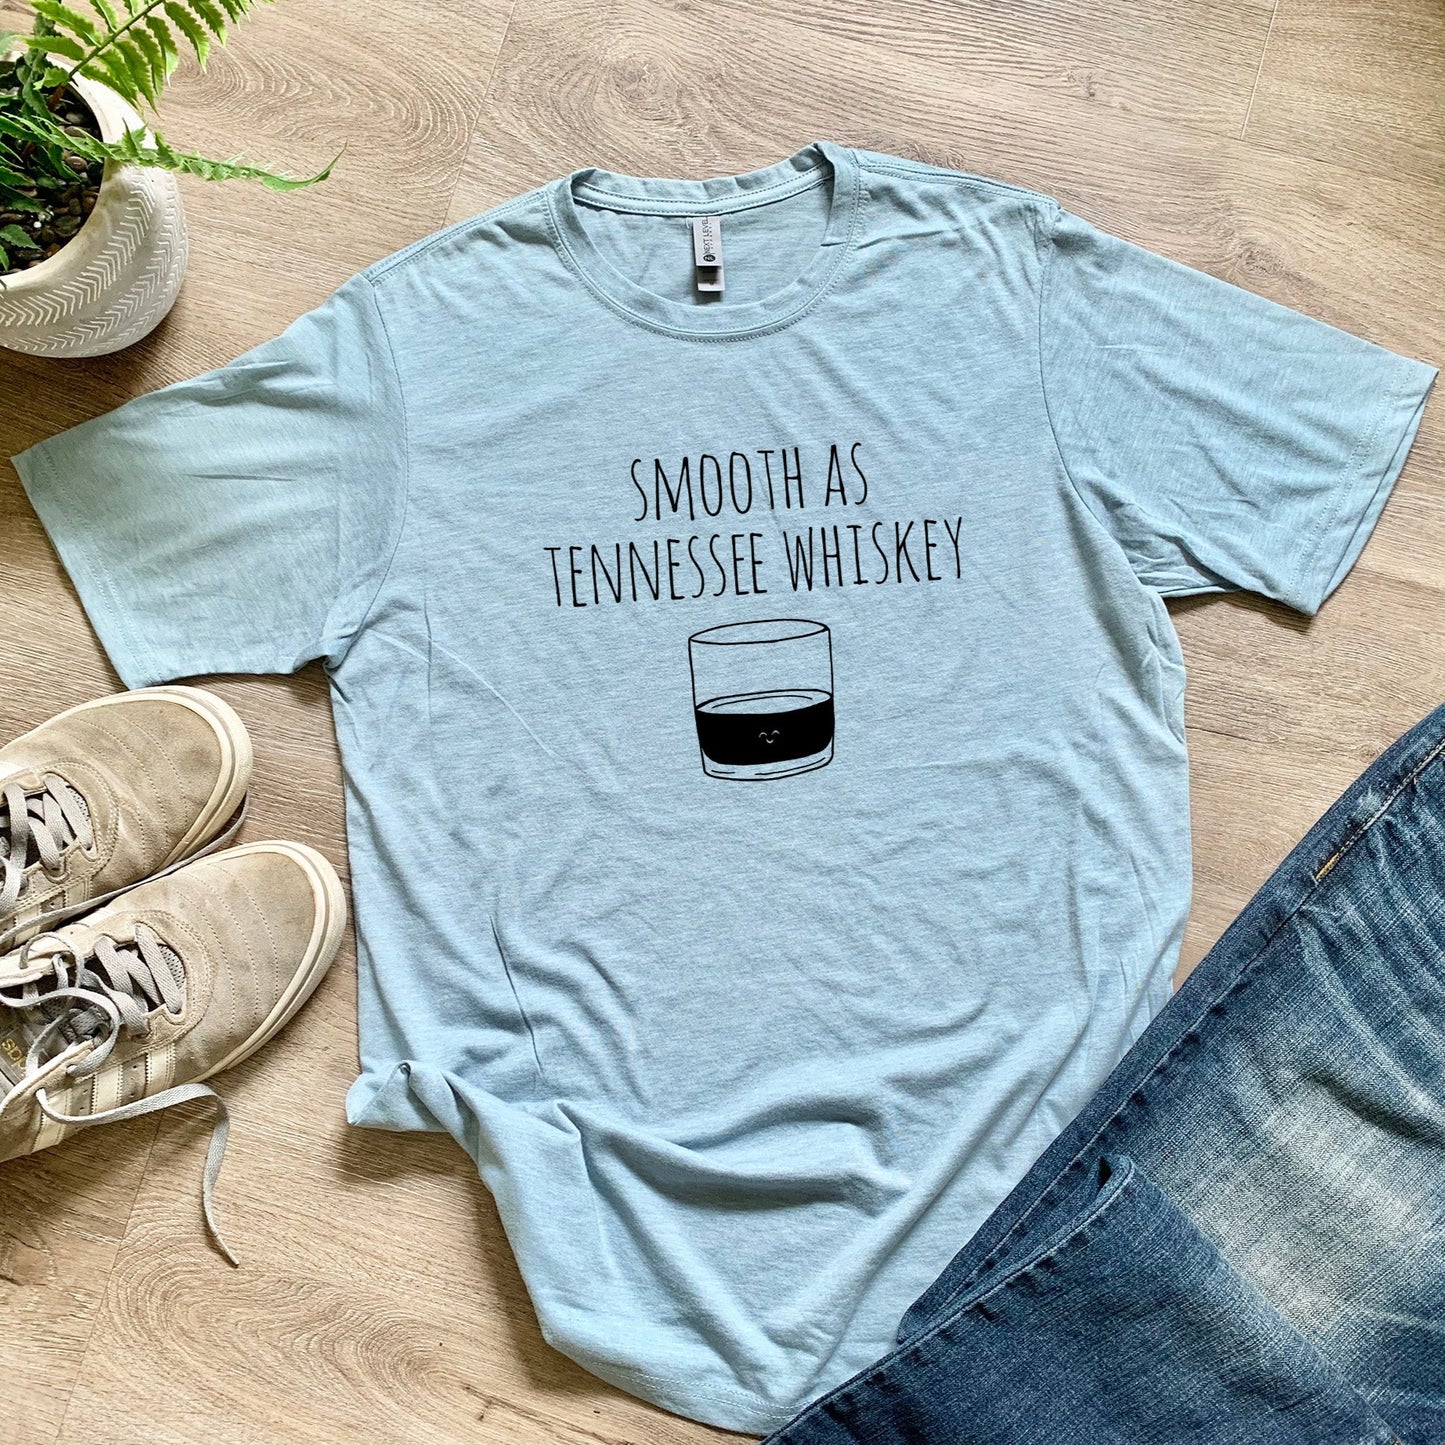 Smooth as Tennessee Whiskey - Men's / Unisex Tee - Stonewash Blue or Sage